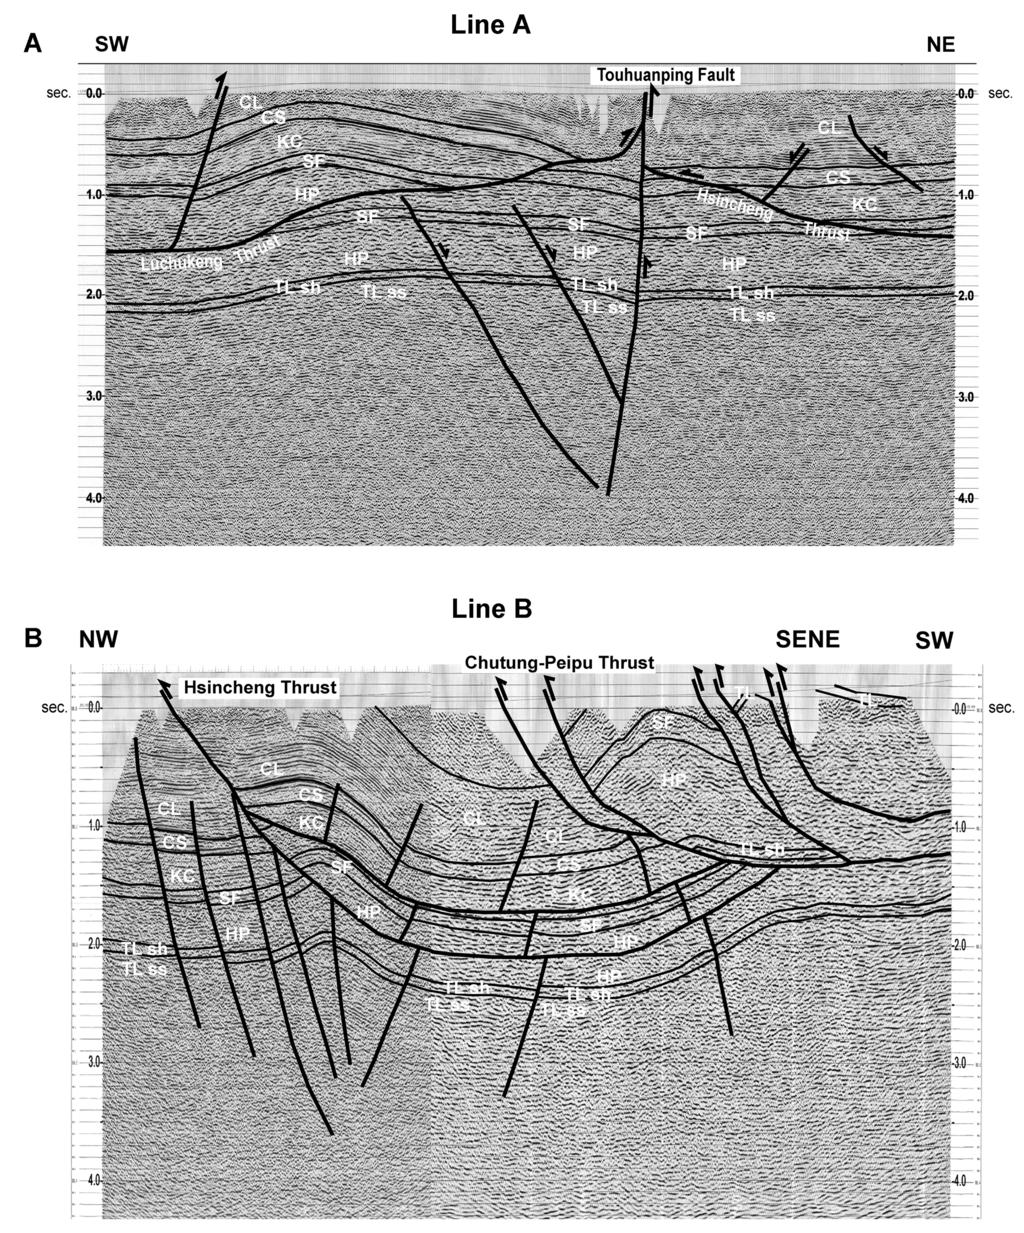 FORELAND TECTONICS, WESTERN TAIWAN 931 FIG. 13. Seismic profiles demonstrating various connective relationships between high-angle transverse faults and low-angle thrust faults in northwestern Taiwan.